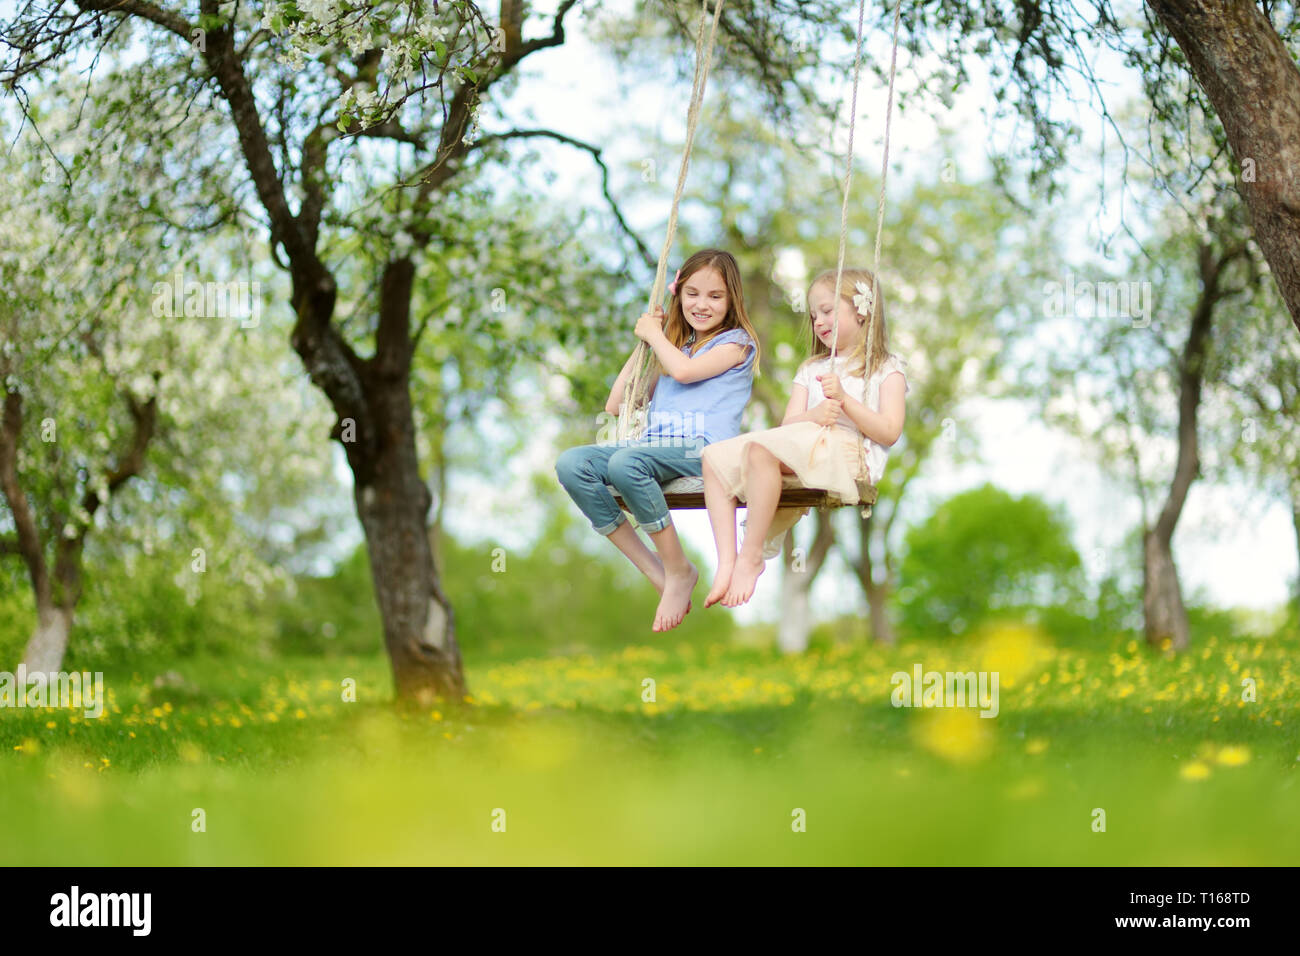 Two cute sisters having fun on a swing in blossoming old apple tree garden outdoors on sunny spring day. Spring outdoor activities for kids. Stock Photo